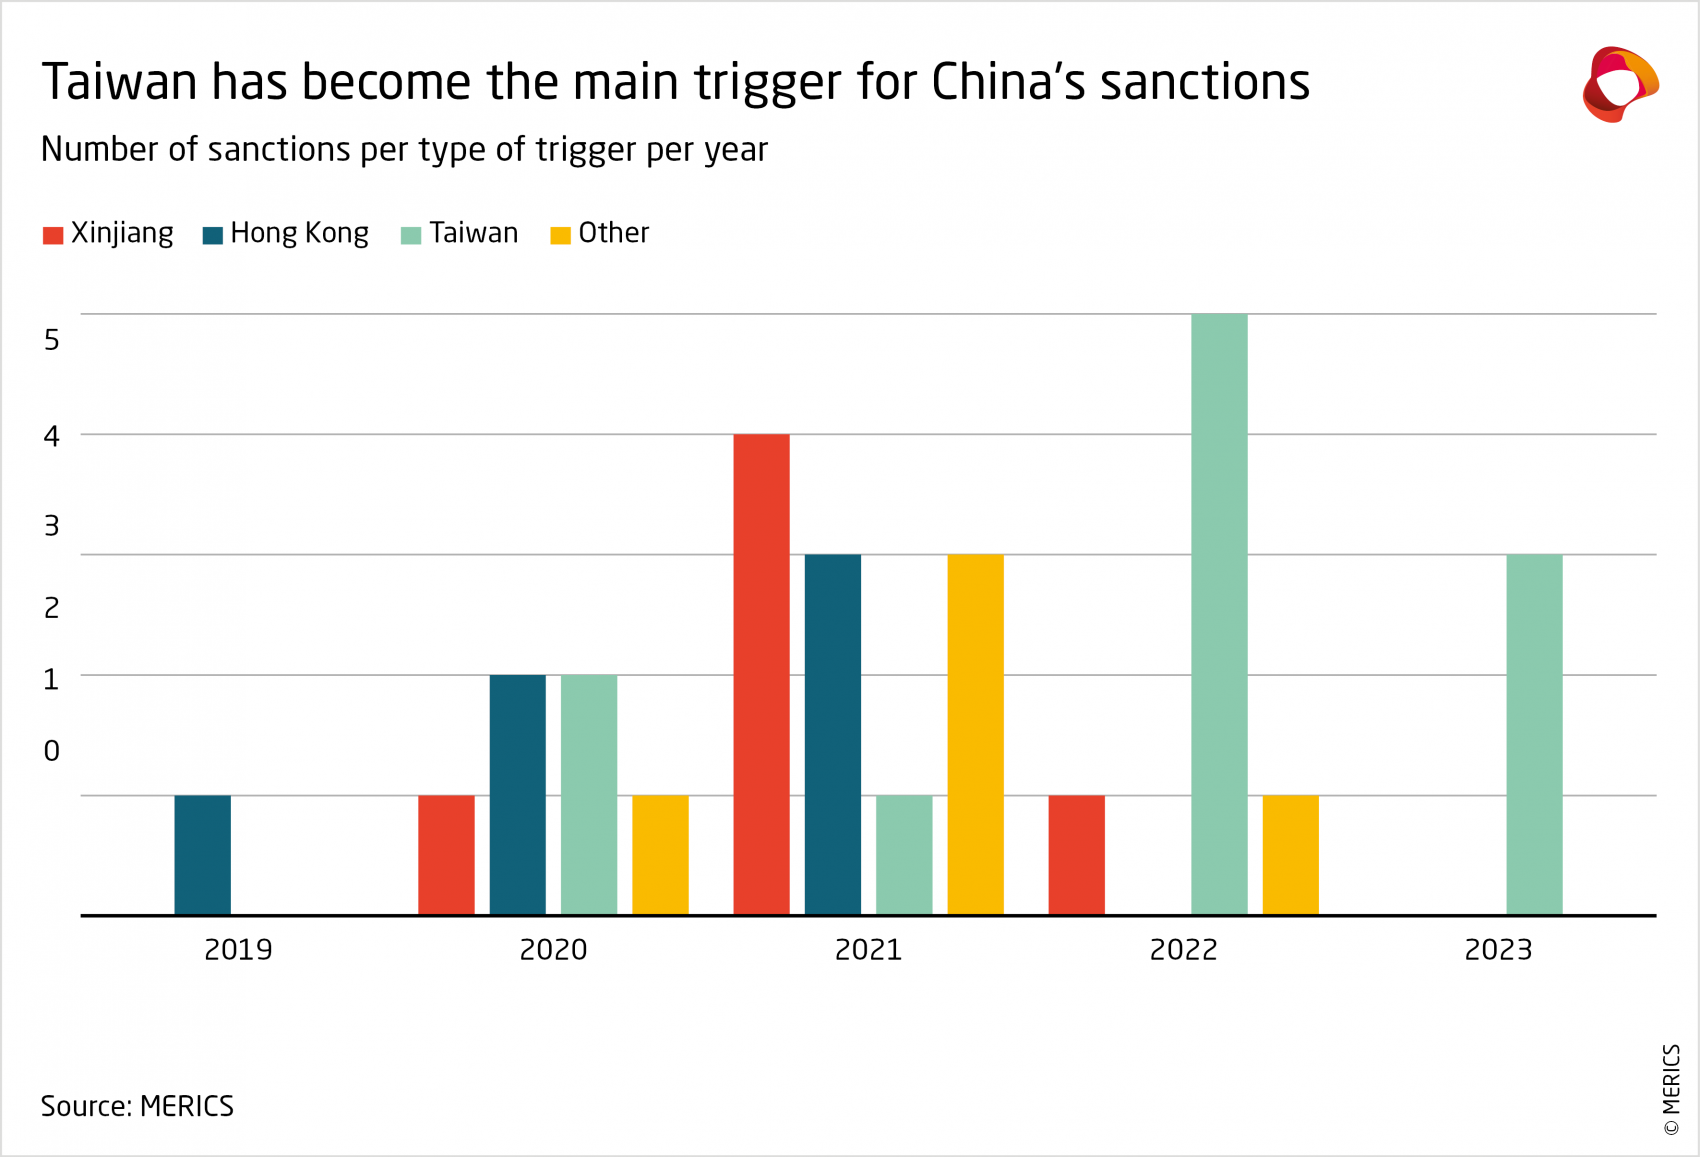 Taiwan has become the main trigger for China's sanctions